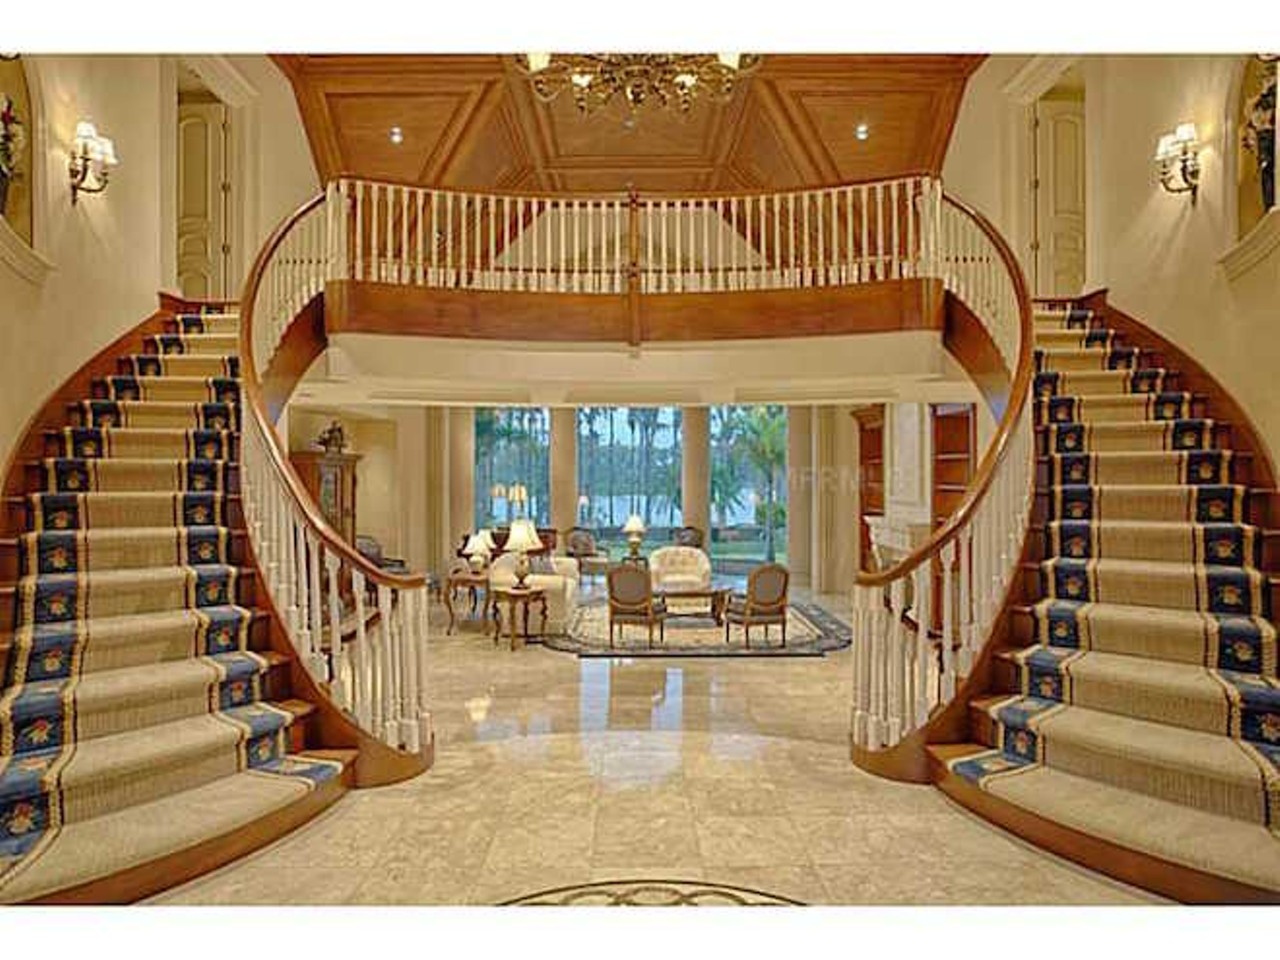 It features a double stairway, for your most dramatic entrances and tearful moments.